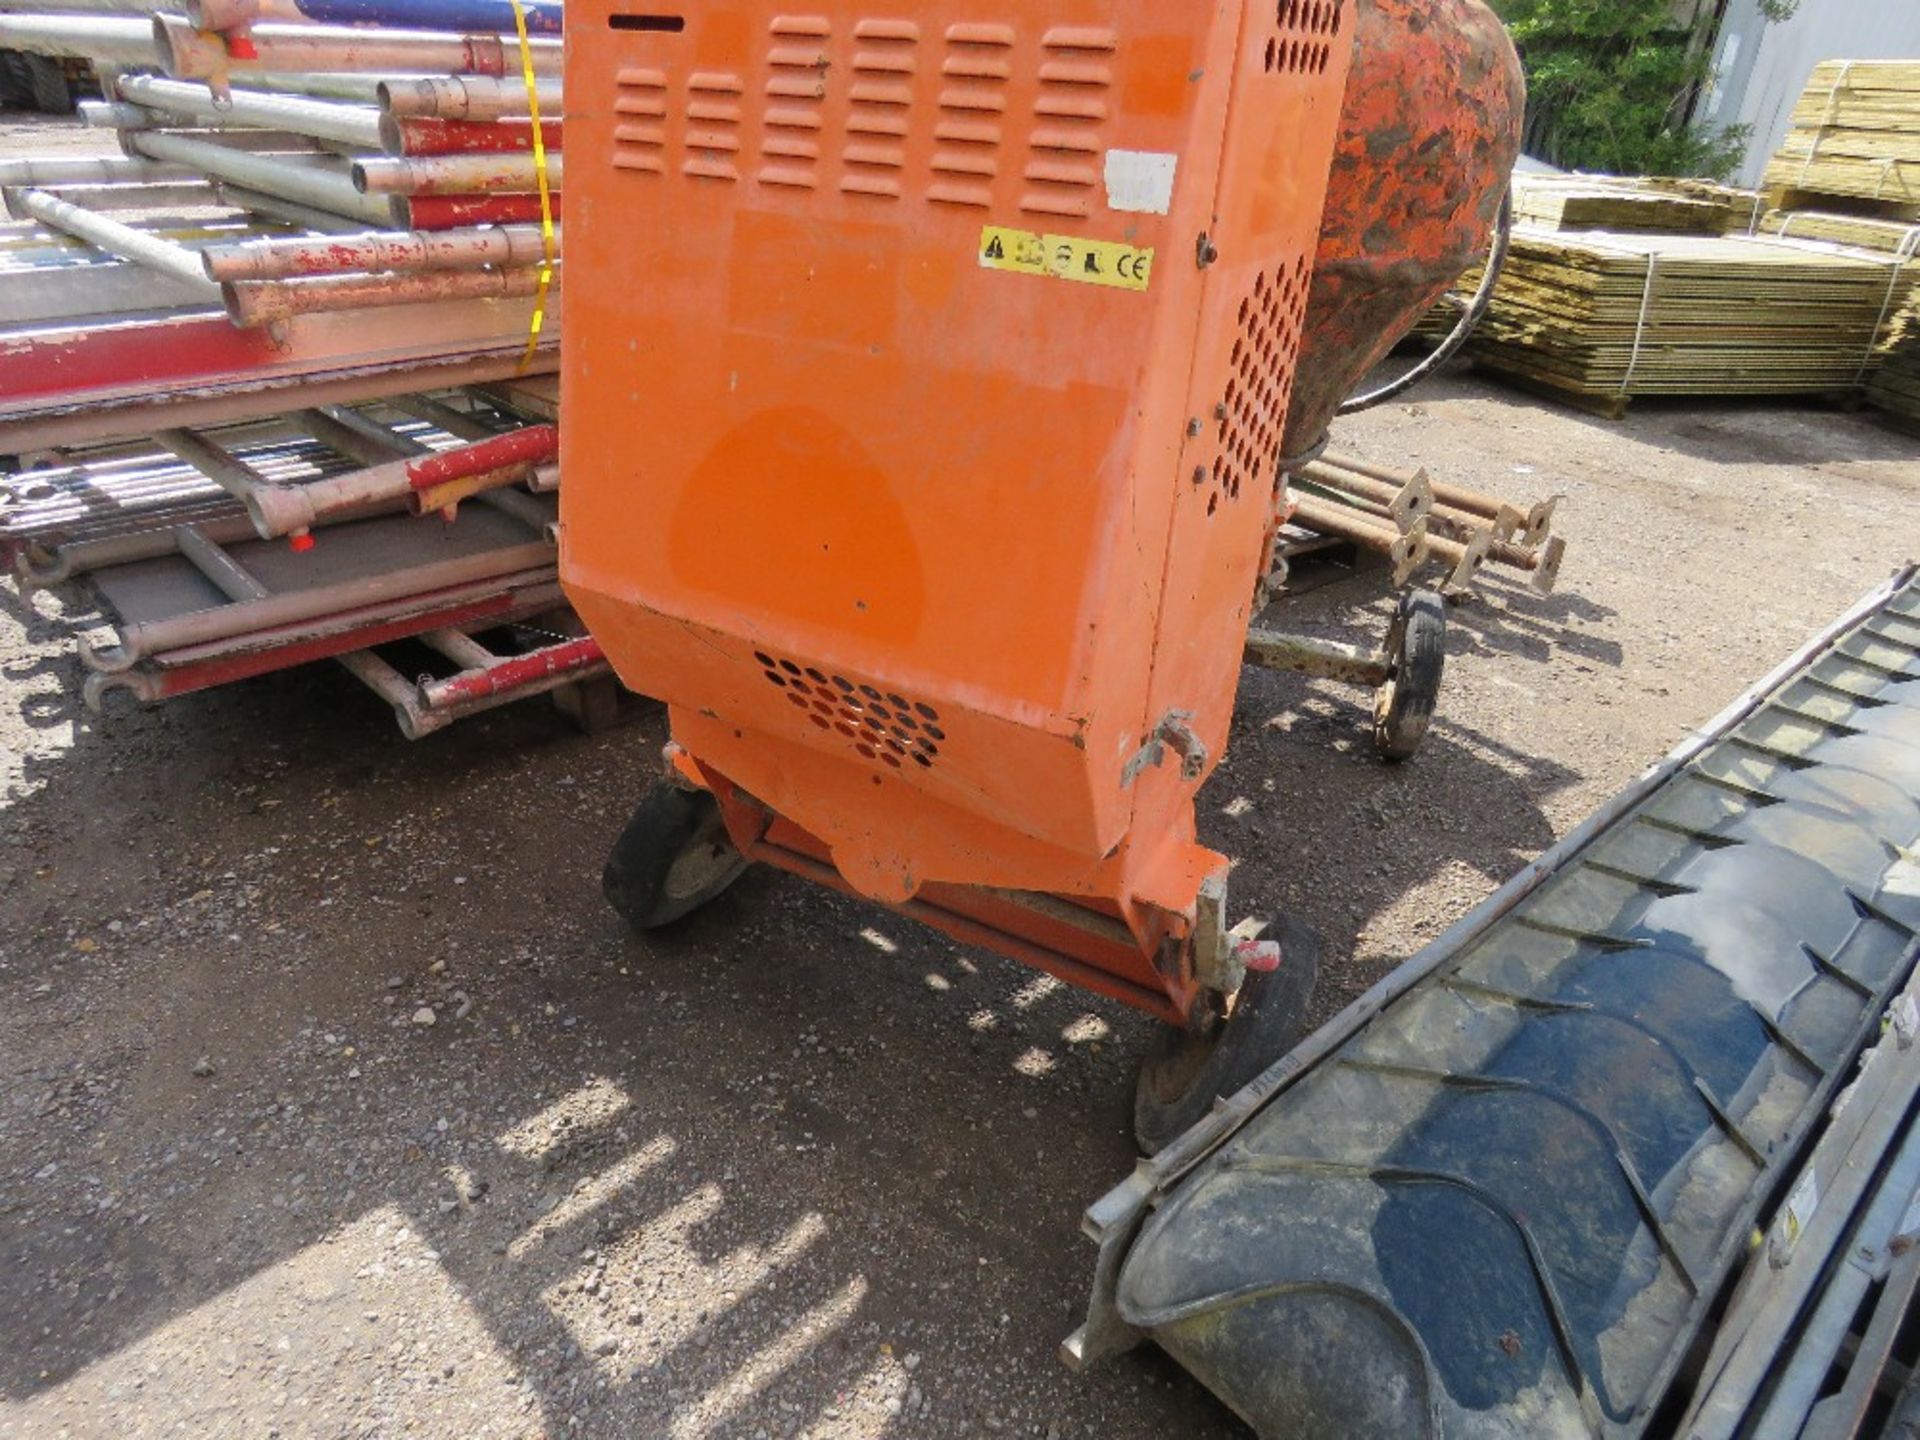 110 VOLT BELLE SITE MIXER. WHEN TESTED WAS SEEN TO RUN AND MIX - Image 2 of 3